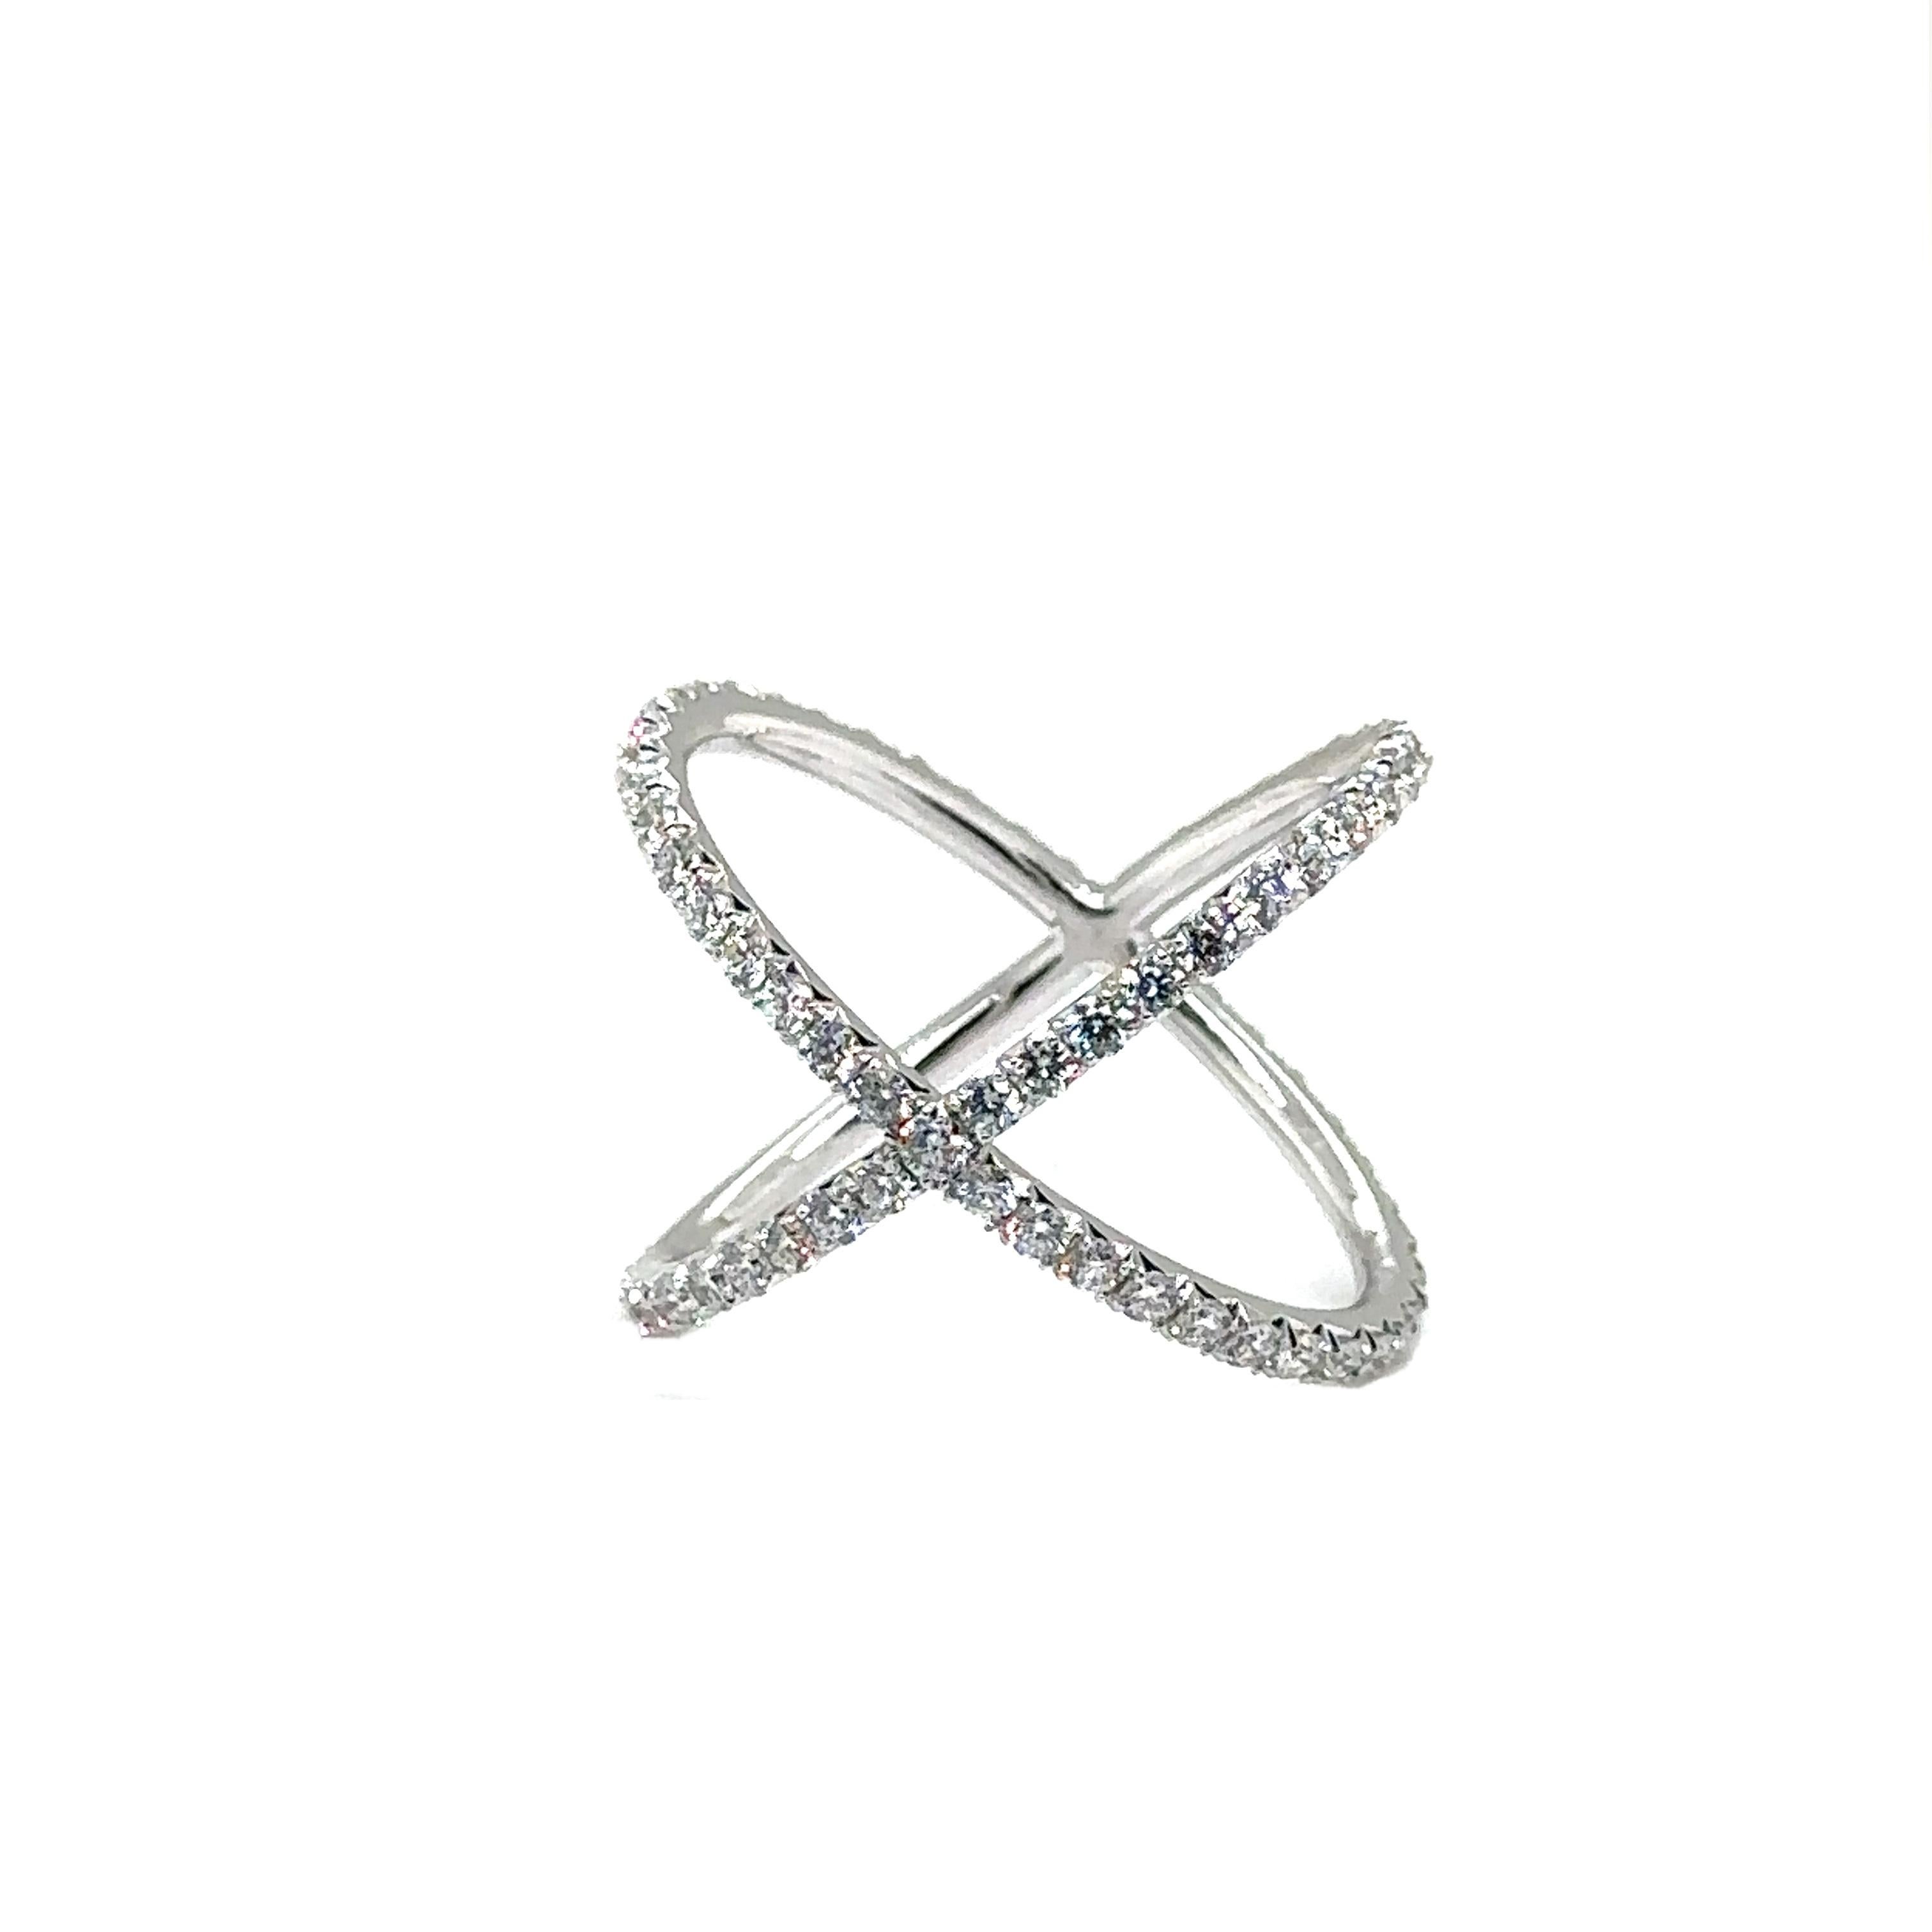 18K WHITE GOLD X RING with DIAMONDS 
Metal: 18K WHITE GOLD
Diamond Info: 
82-H/SI ROUND BRILLIANT DIAMONDS
SET IN MICRO PAVE FISH TAIL TWO BEADS 
Total Ct Weight:  1.19 cwt.
Item Weight: 3.18 gm
Ring Size: 6 ¼ (Not Re-sizable)
Measurements: 16.30 mm
